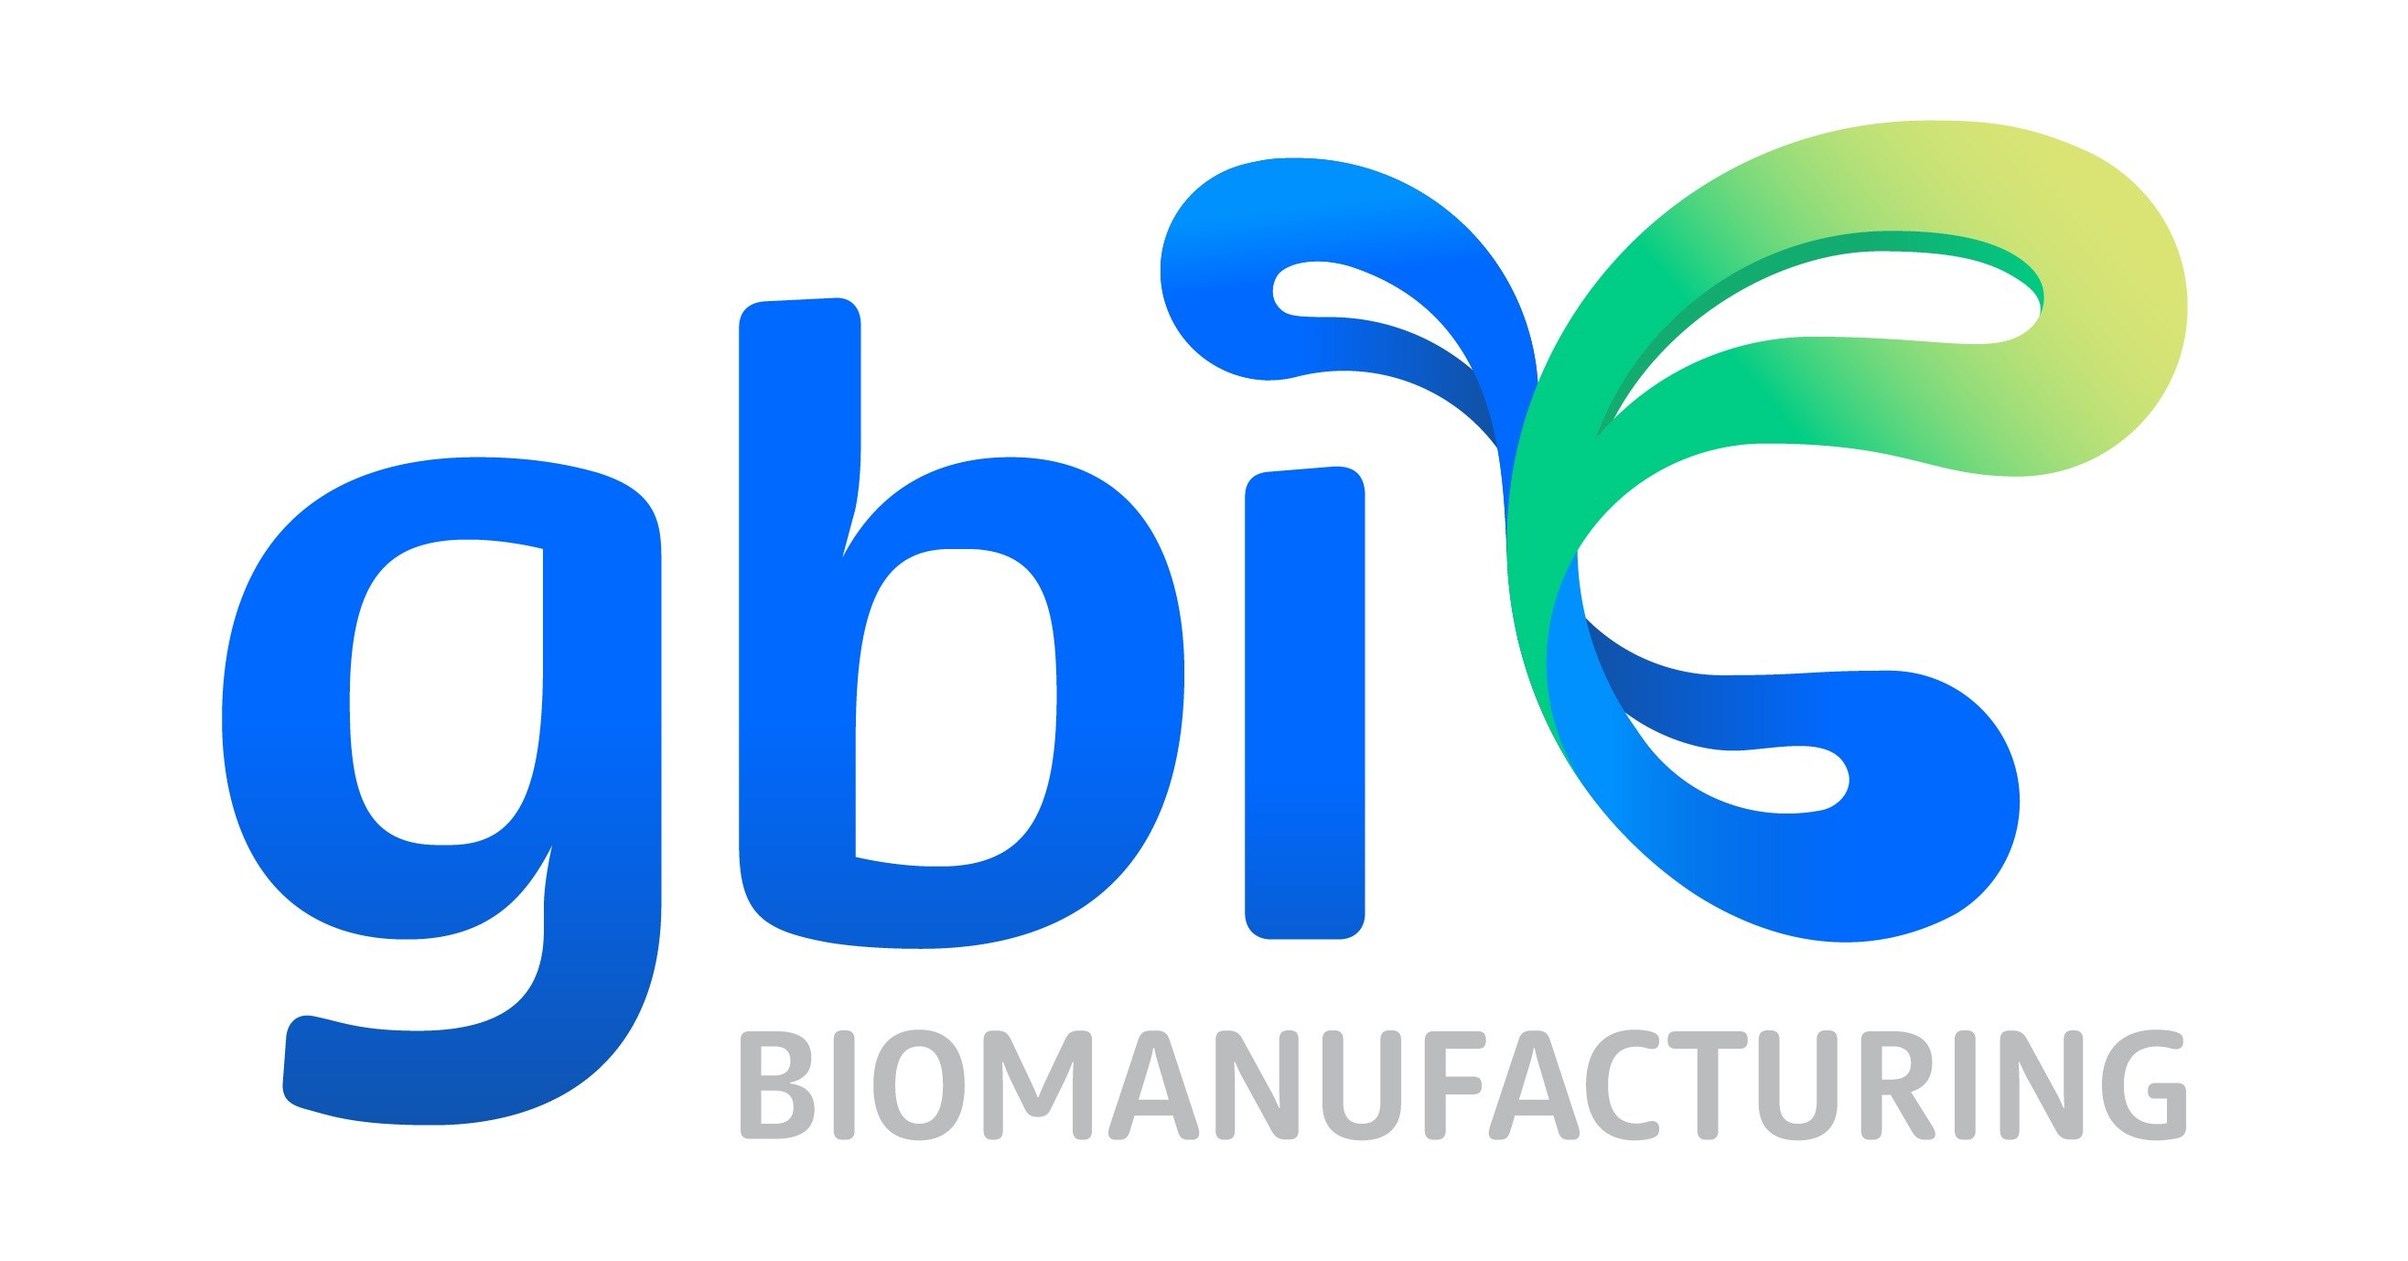 Goodwin Biotechnology Inc. is now GBI, as Part of their Rebranding